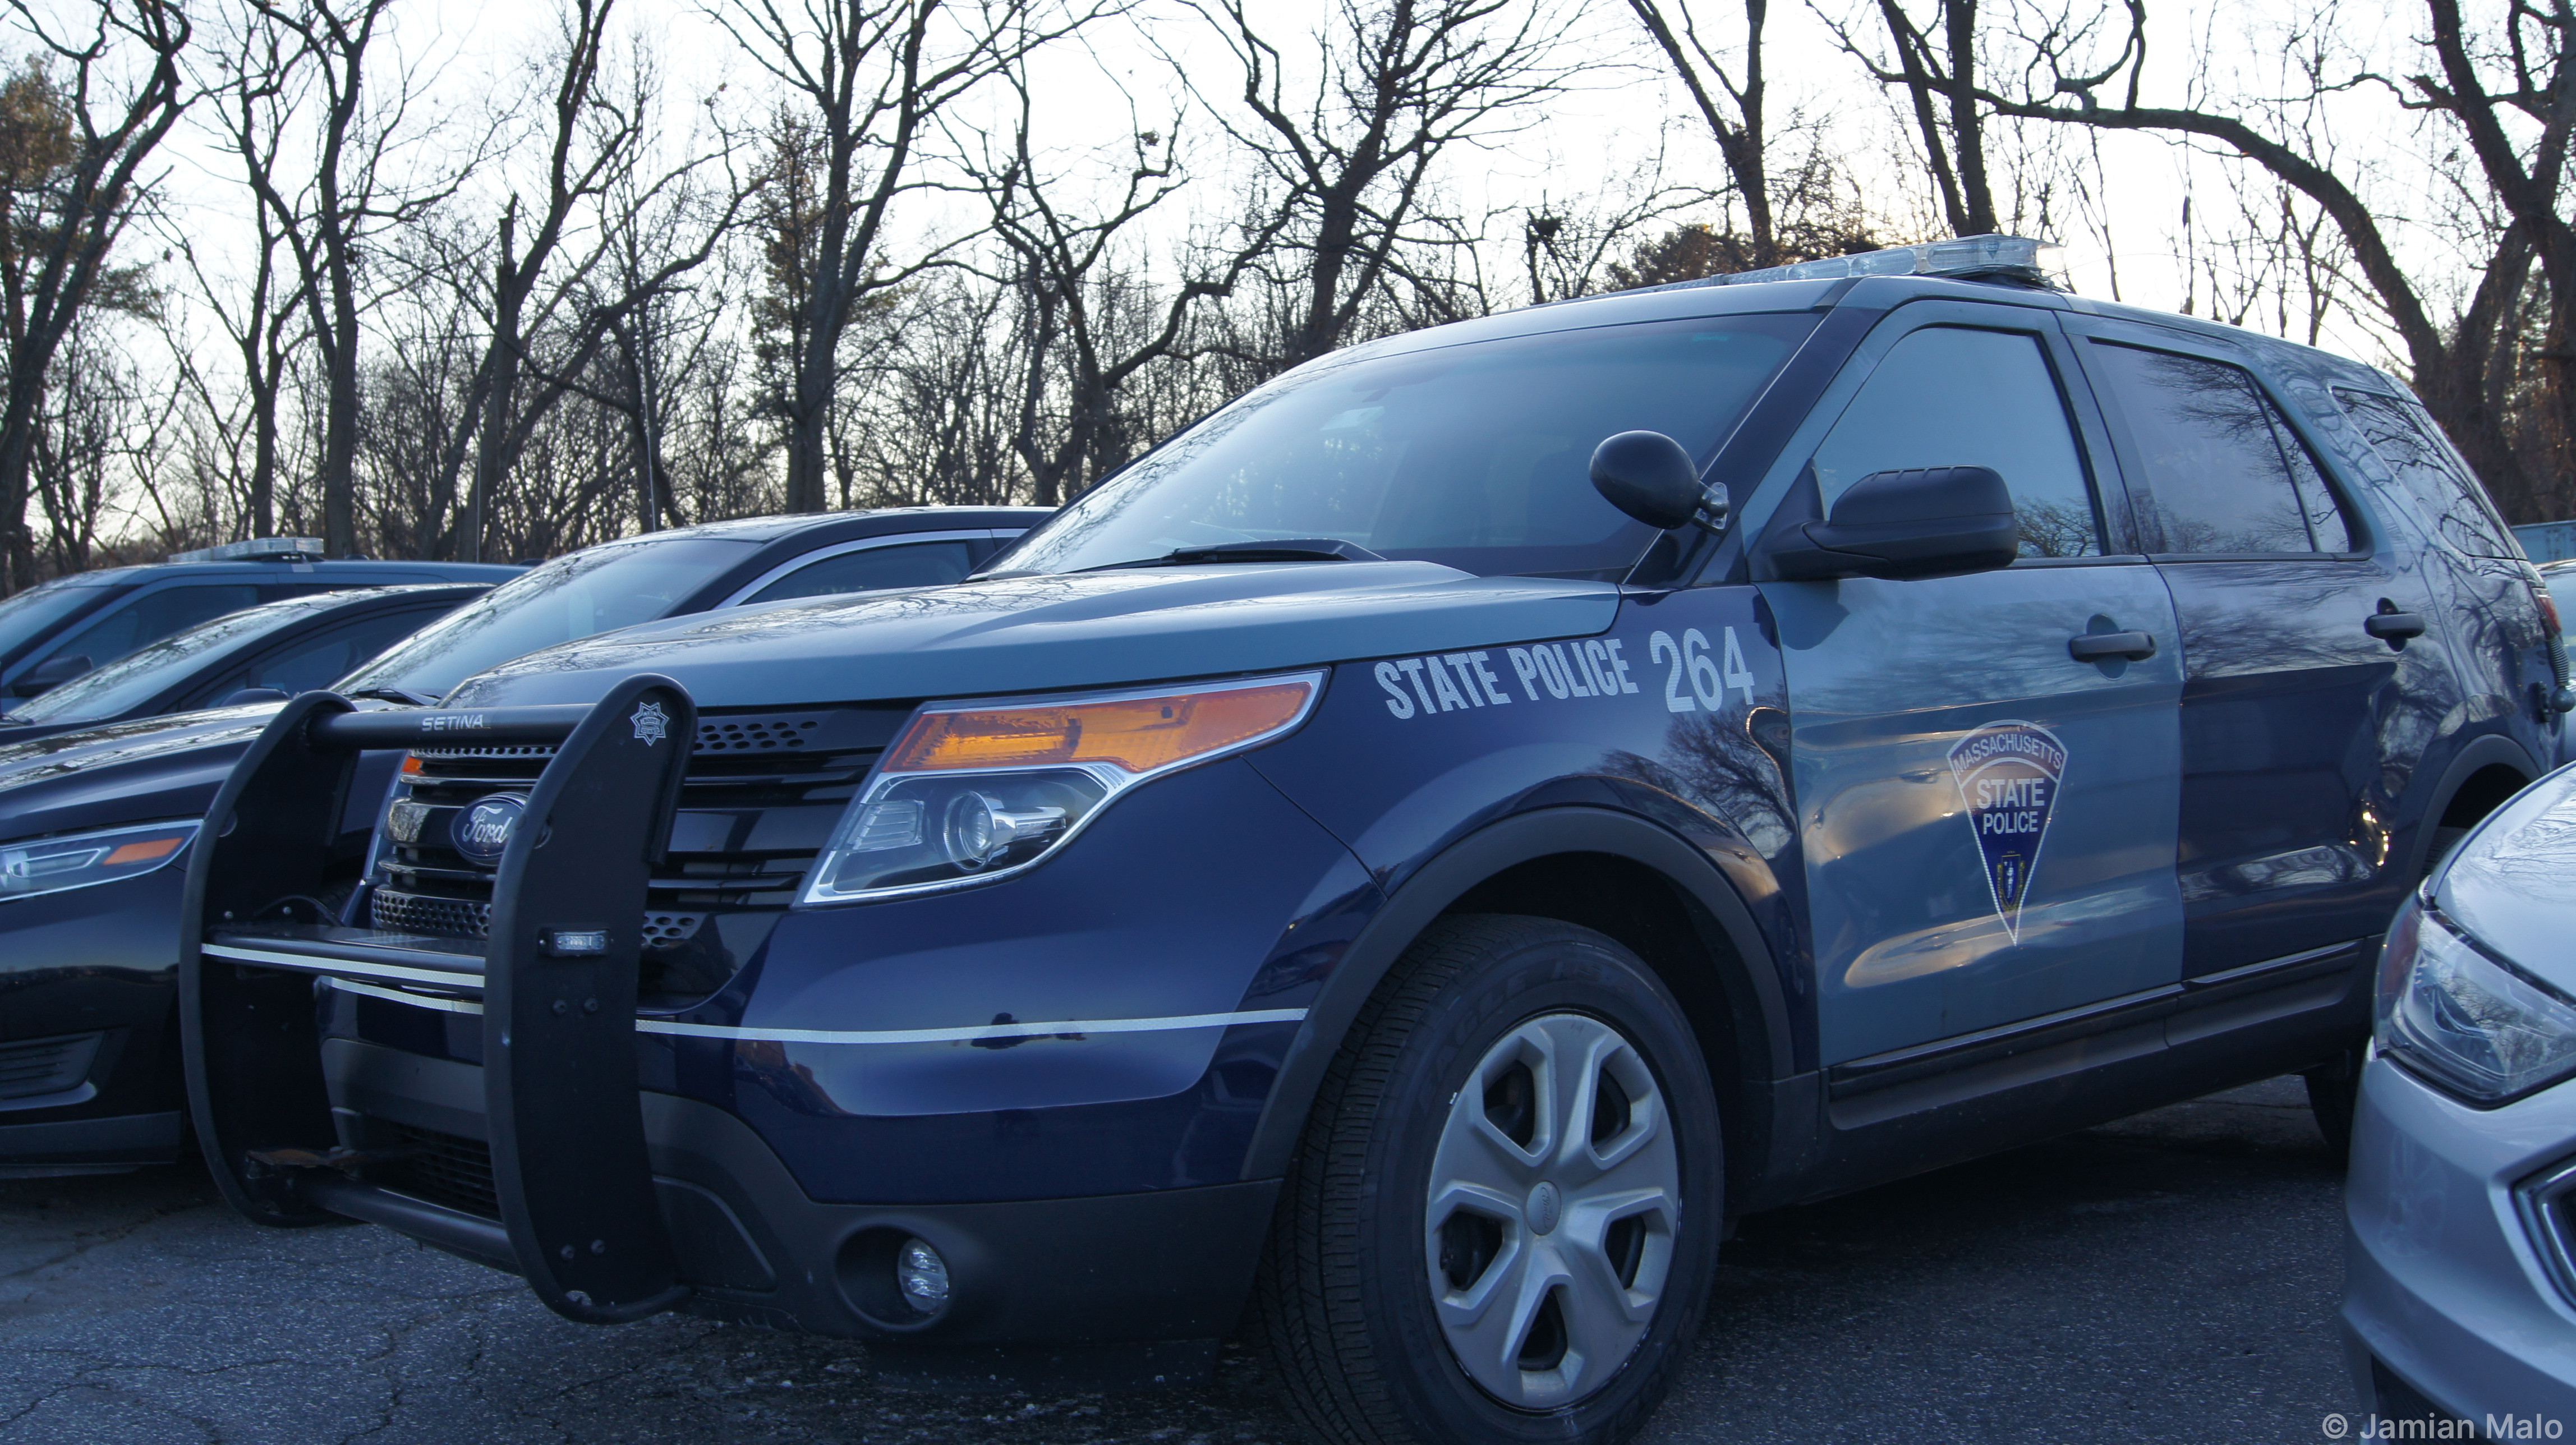 A photo  of Massachusetts State Police
            Cruiser 264, a 2015 Ford Police Interceptor Utility             taken by Jamian Malo